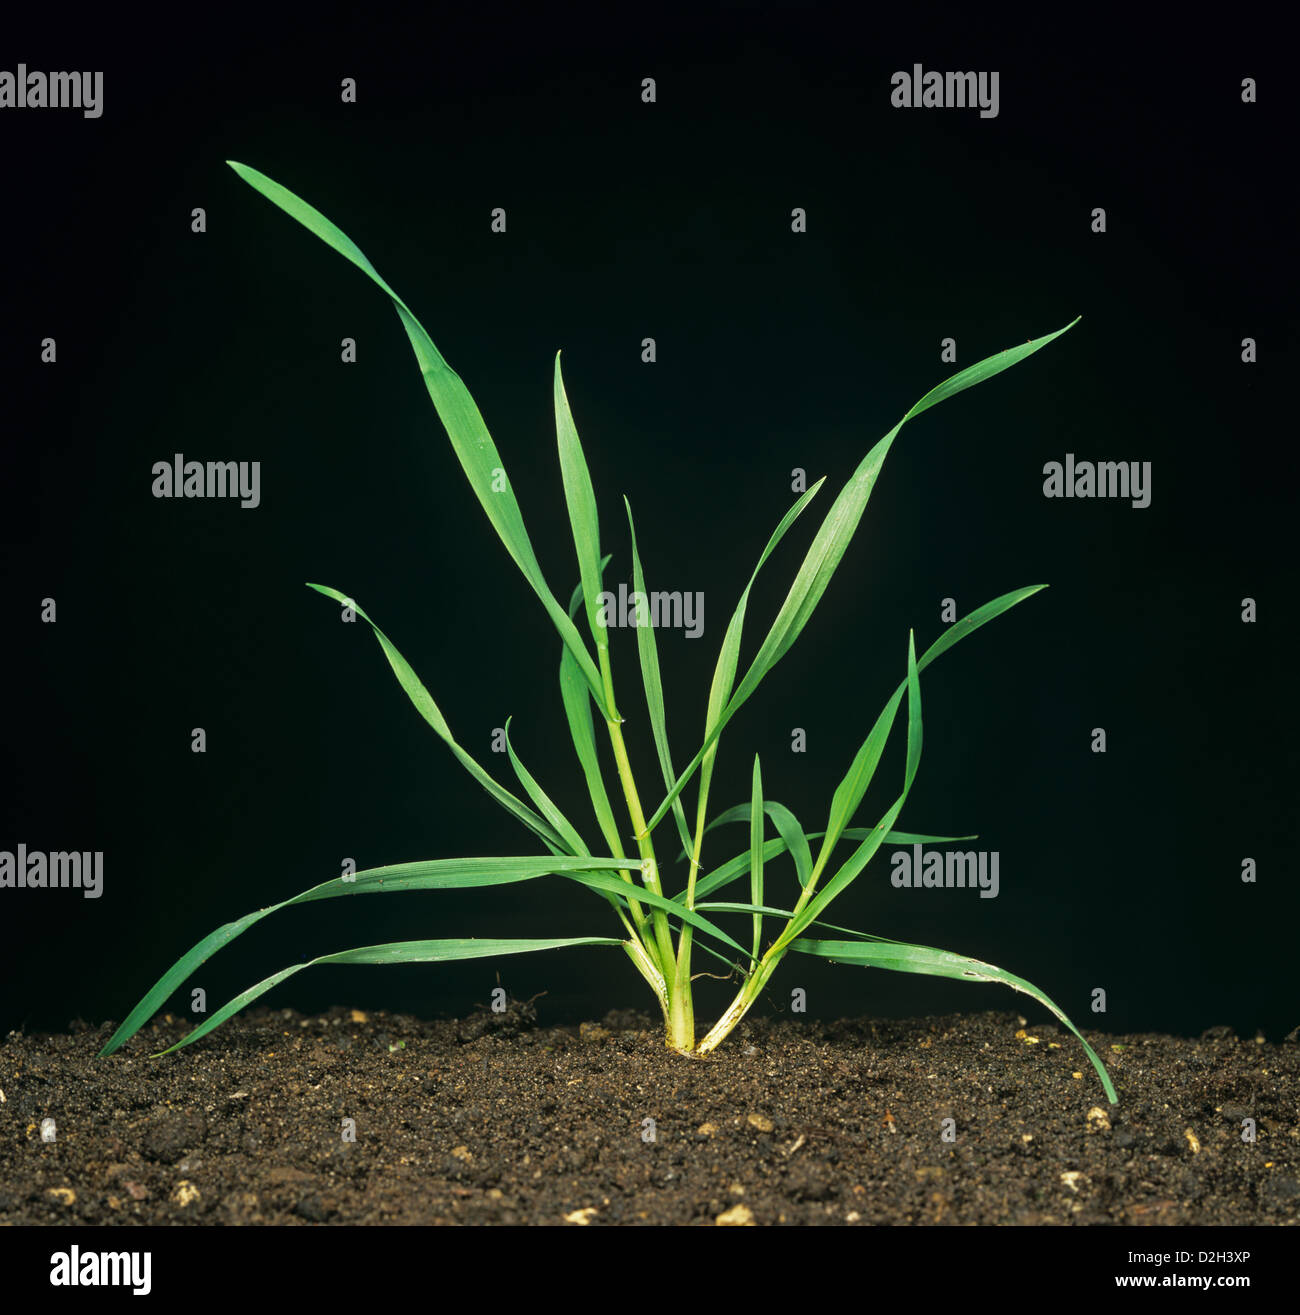 Winter wheat plant at Zadoks stage 30 (Feekes stage 5) two tillers in soil against a studio black background Stock Photo